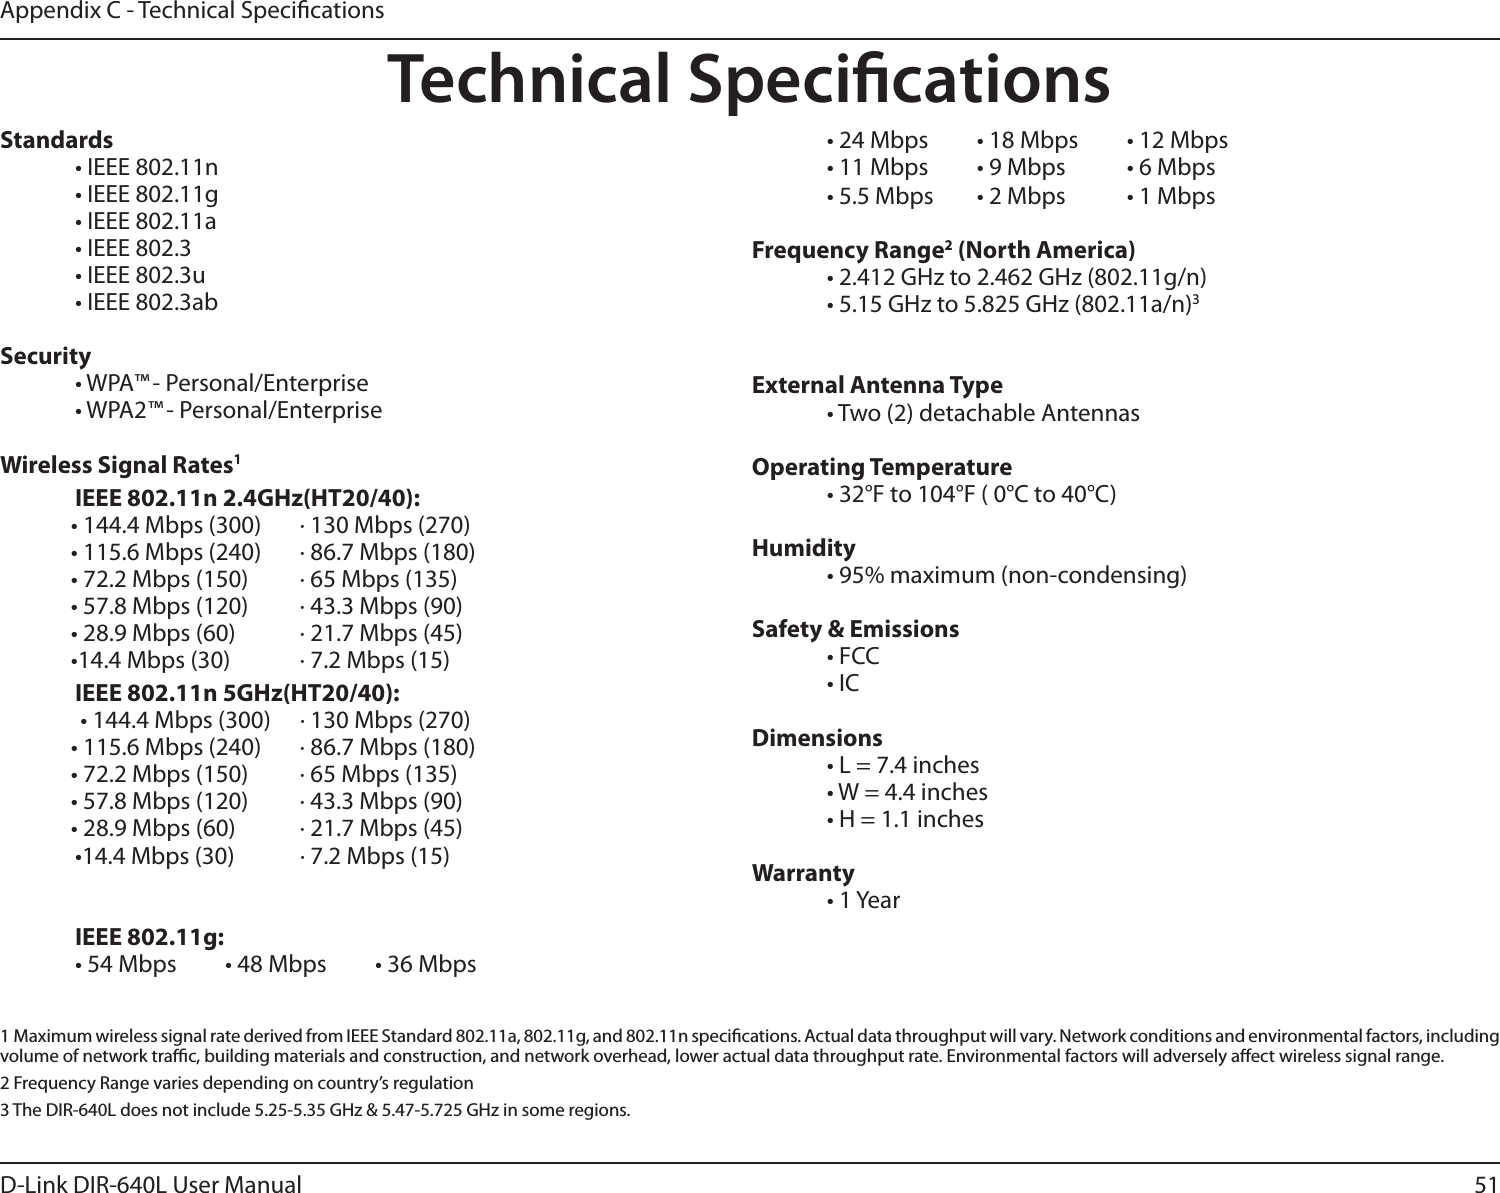 51D-Link DIR-640L User ManualAppendix C - Technical SpecicationsTechnical SpecicationsStandards  • IEEE 802.11n  • IEEE 802.11g  • IEEE 802.11a  • IEEE 802.3  • IEEE 802.3u  • IEEE 802.3abSecurity  • WPA™ - Personal/Enterprise  • WPA2™ - Personal/Enterprise Wireless Signal Rates1  IEEE 802.11n 2.4GHz(HT20/40):• 144.4 Mbps (300)     · 130 Mbps (270)• 115.6 Mbps (240)      · 86.7 Mbps (180)• 72.2 Mbps (150)       · 65 Mbps (135)• 57.8 Mbps (120)       · 43.3 Mbps (90)• 28.9 Mbps (60)  · 21.7 Mbps (45)•14.4 Mbps (30)  · 7.2 Mbps (15)  IEEE 802.11n 5GHz(HT20/40):   • 144.4 Mbps (300)     · 130 Mbps (270)• 115.6 Mbps (240)      · 86.7 Mbps (180)• 72.2 Mbps (150)       · 65 Mbps (135)• 57.8 Mbps (120)       · 43.3 Mbps (90)• 28.9 Mbps (60)  · 21.7 Mbps (45)  •14.4 Mbps (30)  · 7.2 Mbps (15)  IEEE 802.11g:  • 54 Mbps  • 48 Mbps  • 36 Mbps  • 24 Mbps  • 18 Mbps  • 12 Mbps  • 11 Mbps  • 9 Mbps  • 6 Mbps  • 5.5 Mbps  • 2 Mbps  • 1 MbpsFrequency Range2 (North America)  • 2.412 GHz to 2.462 GHz (802.11g/n)  • 5.15 GHz to 5.825 GHz (802.11a/n)3External Antenna Type  • Two (2) detachable AntennasOperating Temperature  • 32°F to 104°F ( 0°C to 40°C)Humidity  • 95% maximum (non-condensing)Safety &amp; Emissions  • FCC    • ICDimensions  • L = 7.4 inches  • W = 4.4 inches  • H = 1.1 inchesWarranty  • 1 Year1  Maximum wireless signal rate derived from IEEE Standard 802.11a, 802.11g, and 802.11n specications. Actual data throughput will vary. Network conditions and environmental factors, including volume of network trac, building materials and construction, and network overhead, lower actual data throughput rate. Environmental factors will adversely aect wireless signal range.2 Frequency Range varies depending on country’s regulation3 The DIR-640L does not include 5.25-5.35 GHz &amp; 5.47-5.725 GHz in some regions.